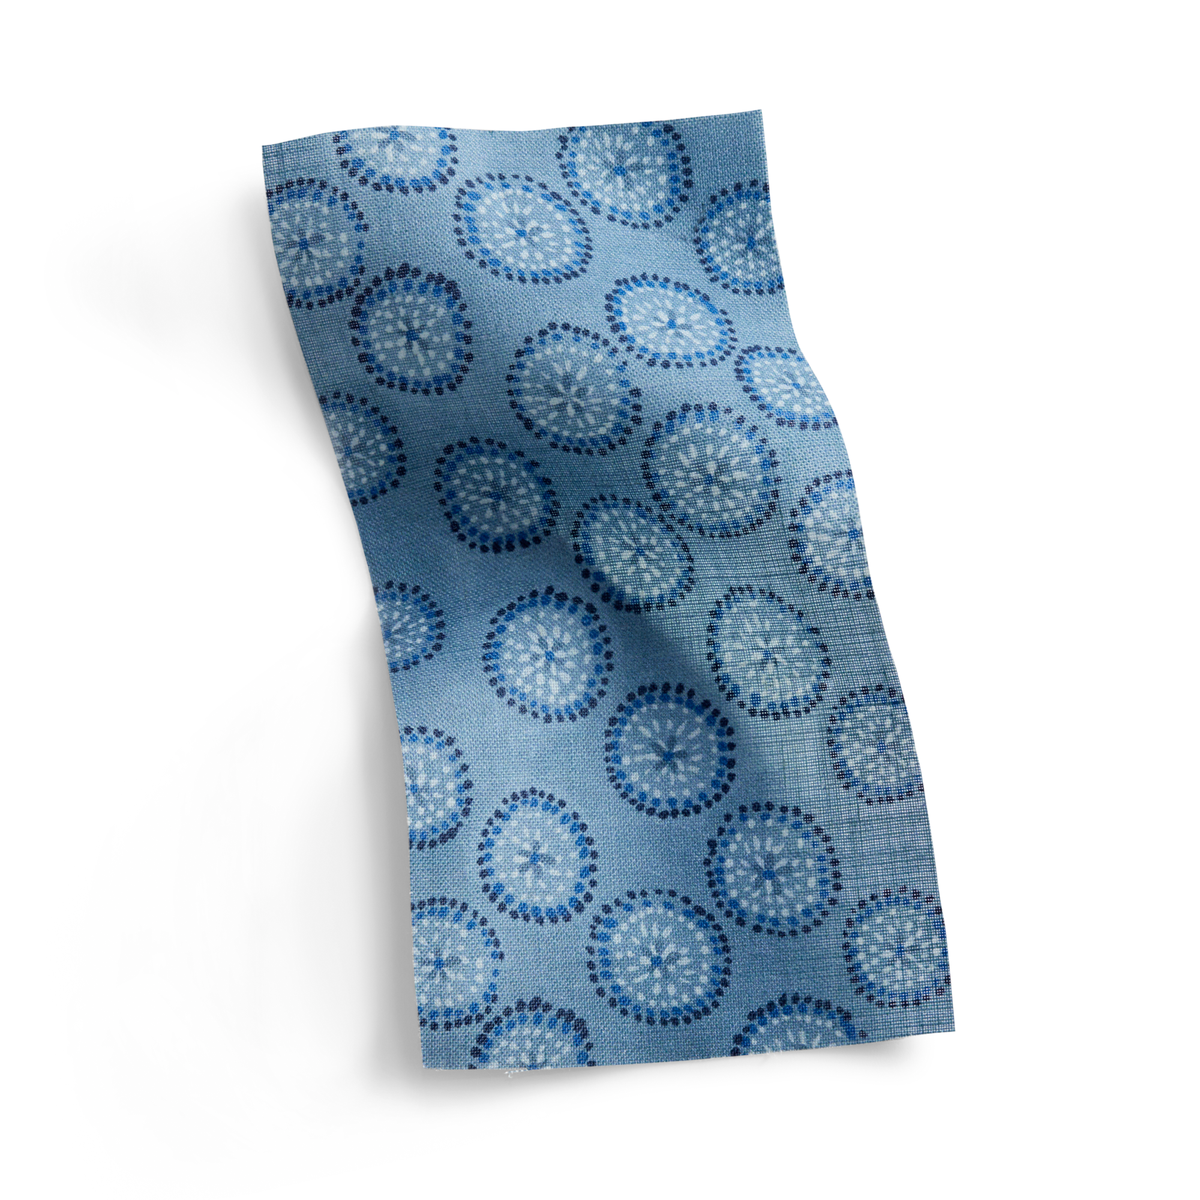 Dotted Floral Fabric in Chambray Blue